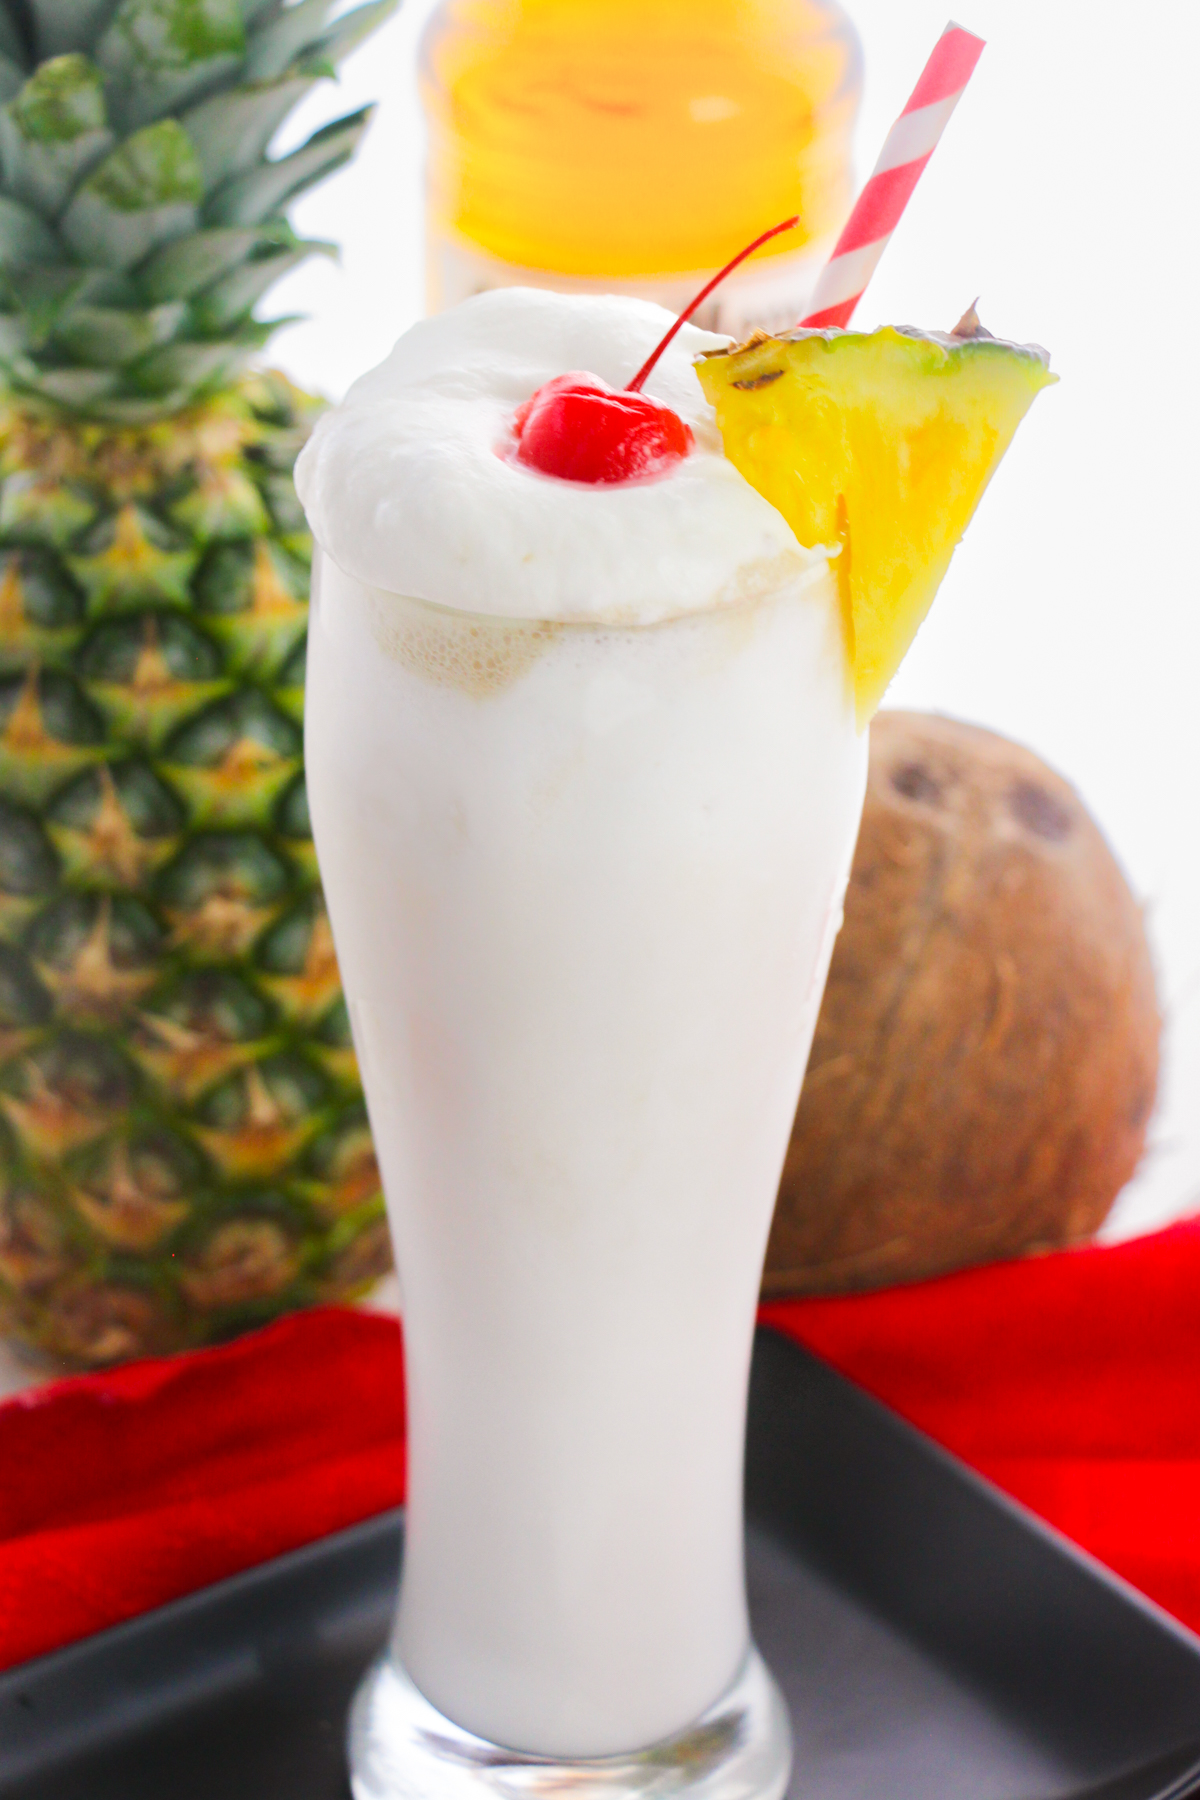 Creamy frozen pina colada with whipped cream, pineapple, and cherry.